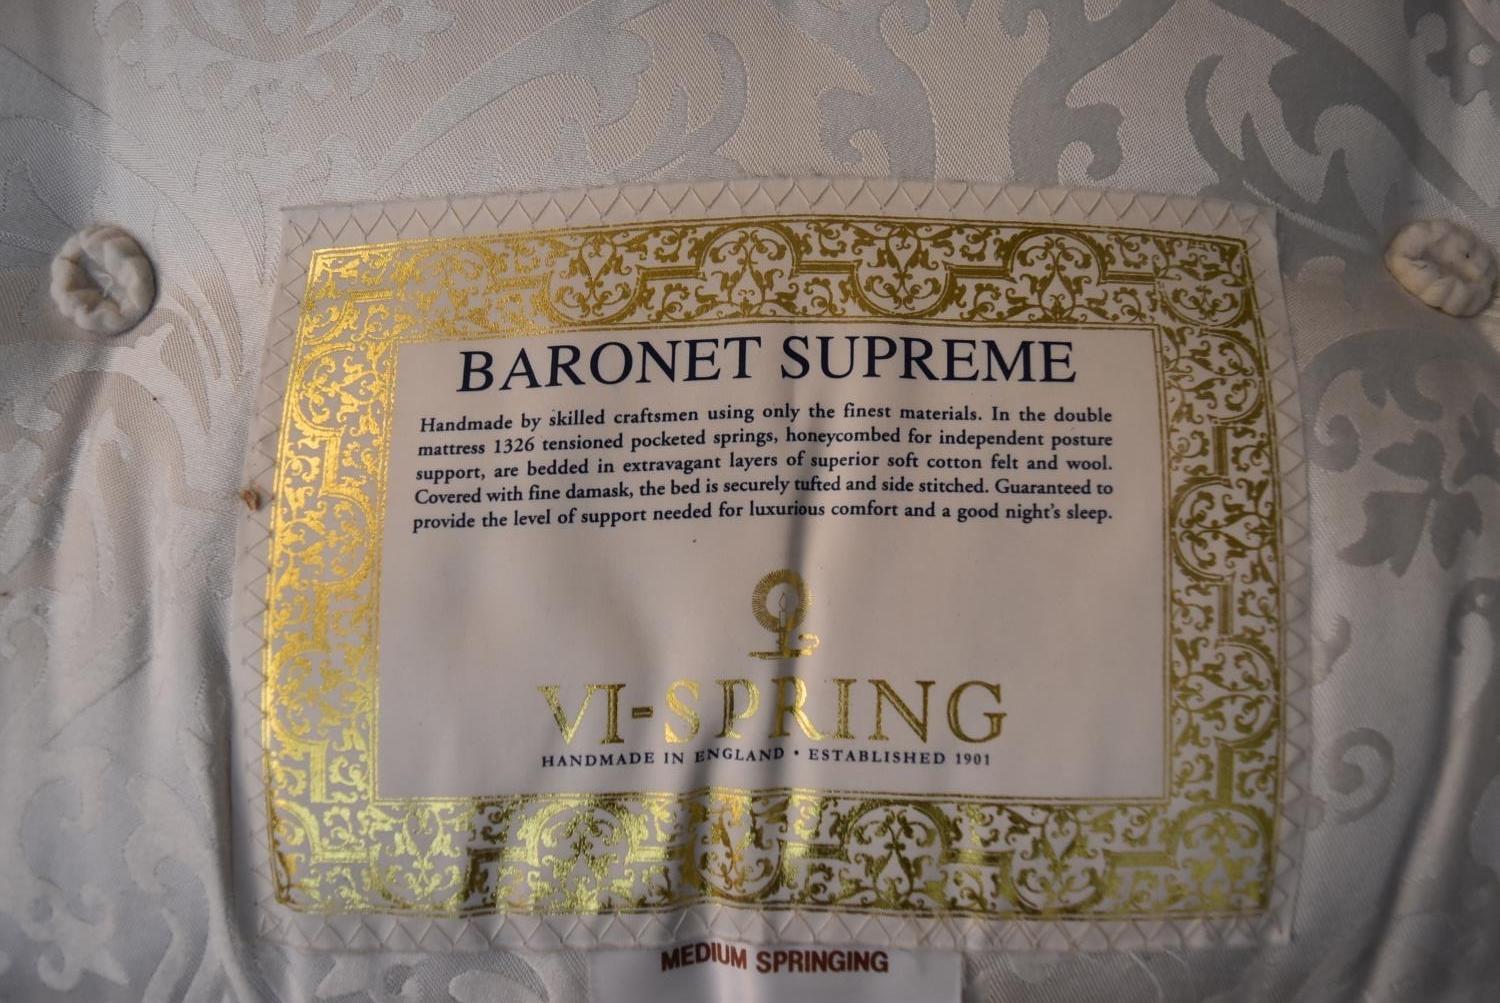 A VI-SPRING divan set. Baronet Supreme. (mattress 4ft 6 inches in very good clean condition) H. - Image 2 of 6